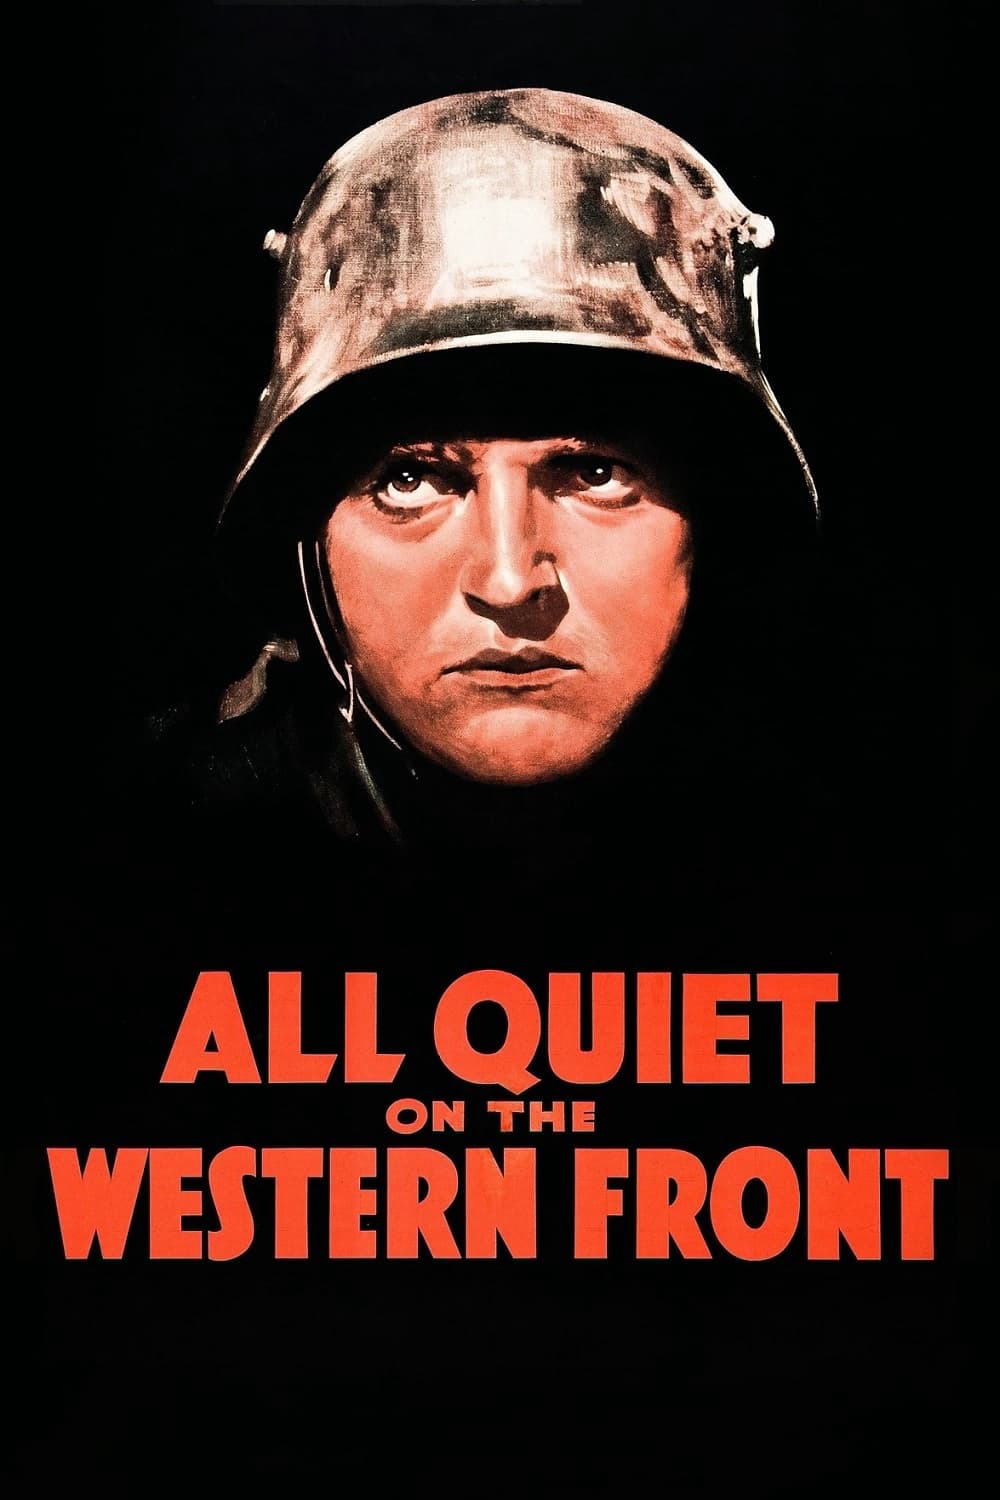 All Quiet On The Western Front (All Quiet On The Western Front) [1930]